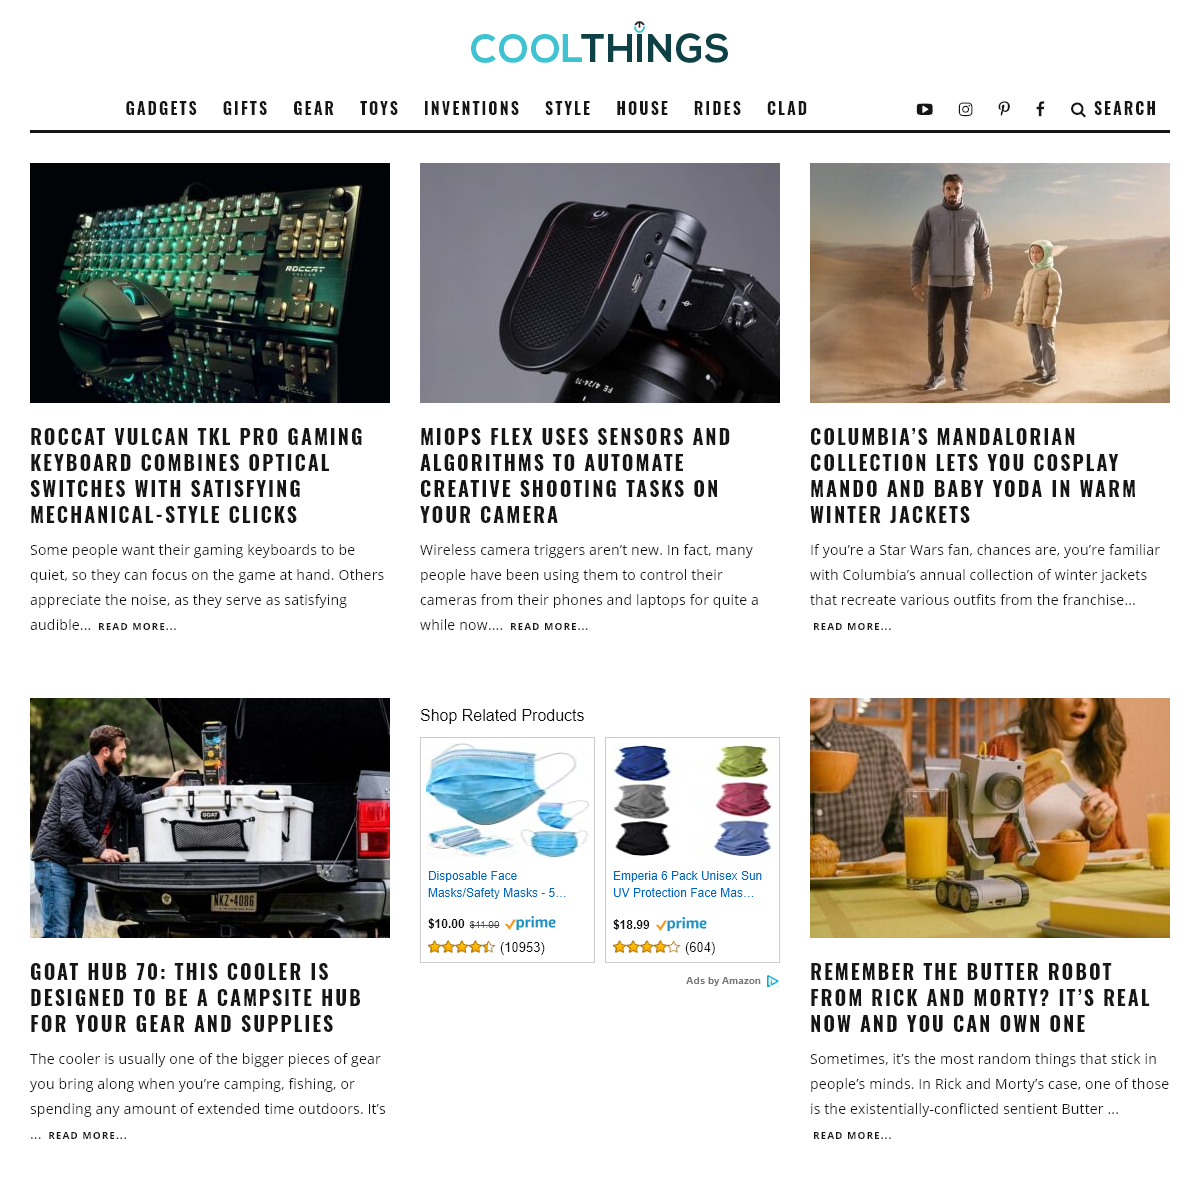 A complete backup of coolthings.com